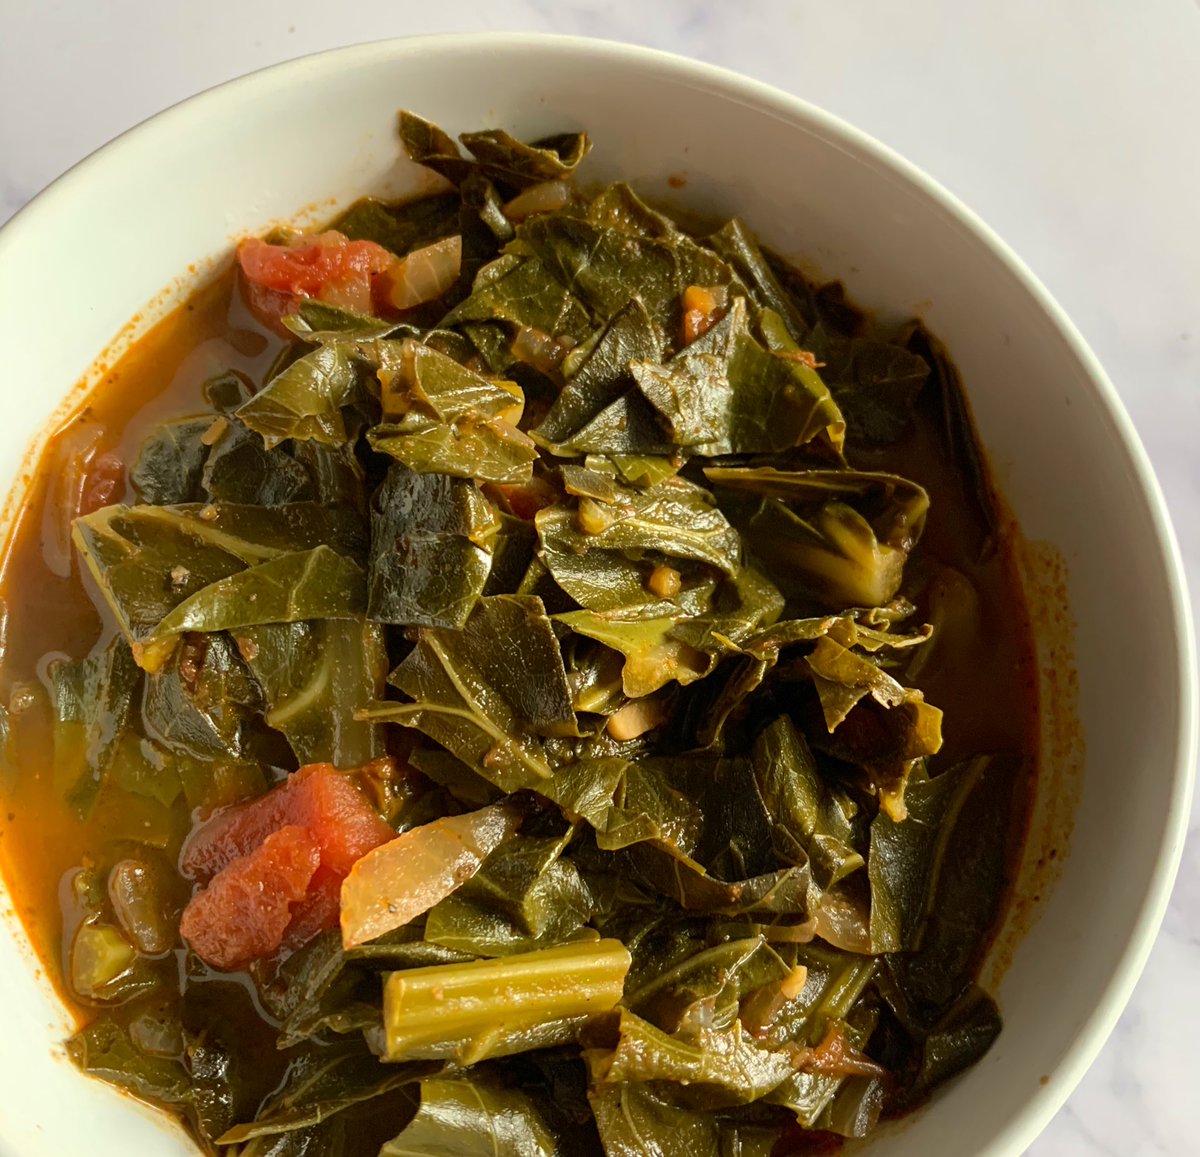 Greens without the turkey neck! I prefer kale and collard greens, but this recipe is good for mustard greens too. Full recipe here -  https://whereshebegins.com/plant-based-bre/2019/2/13/collard-green-recipe |  #plantbasedpath